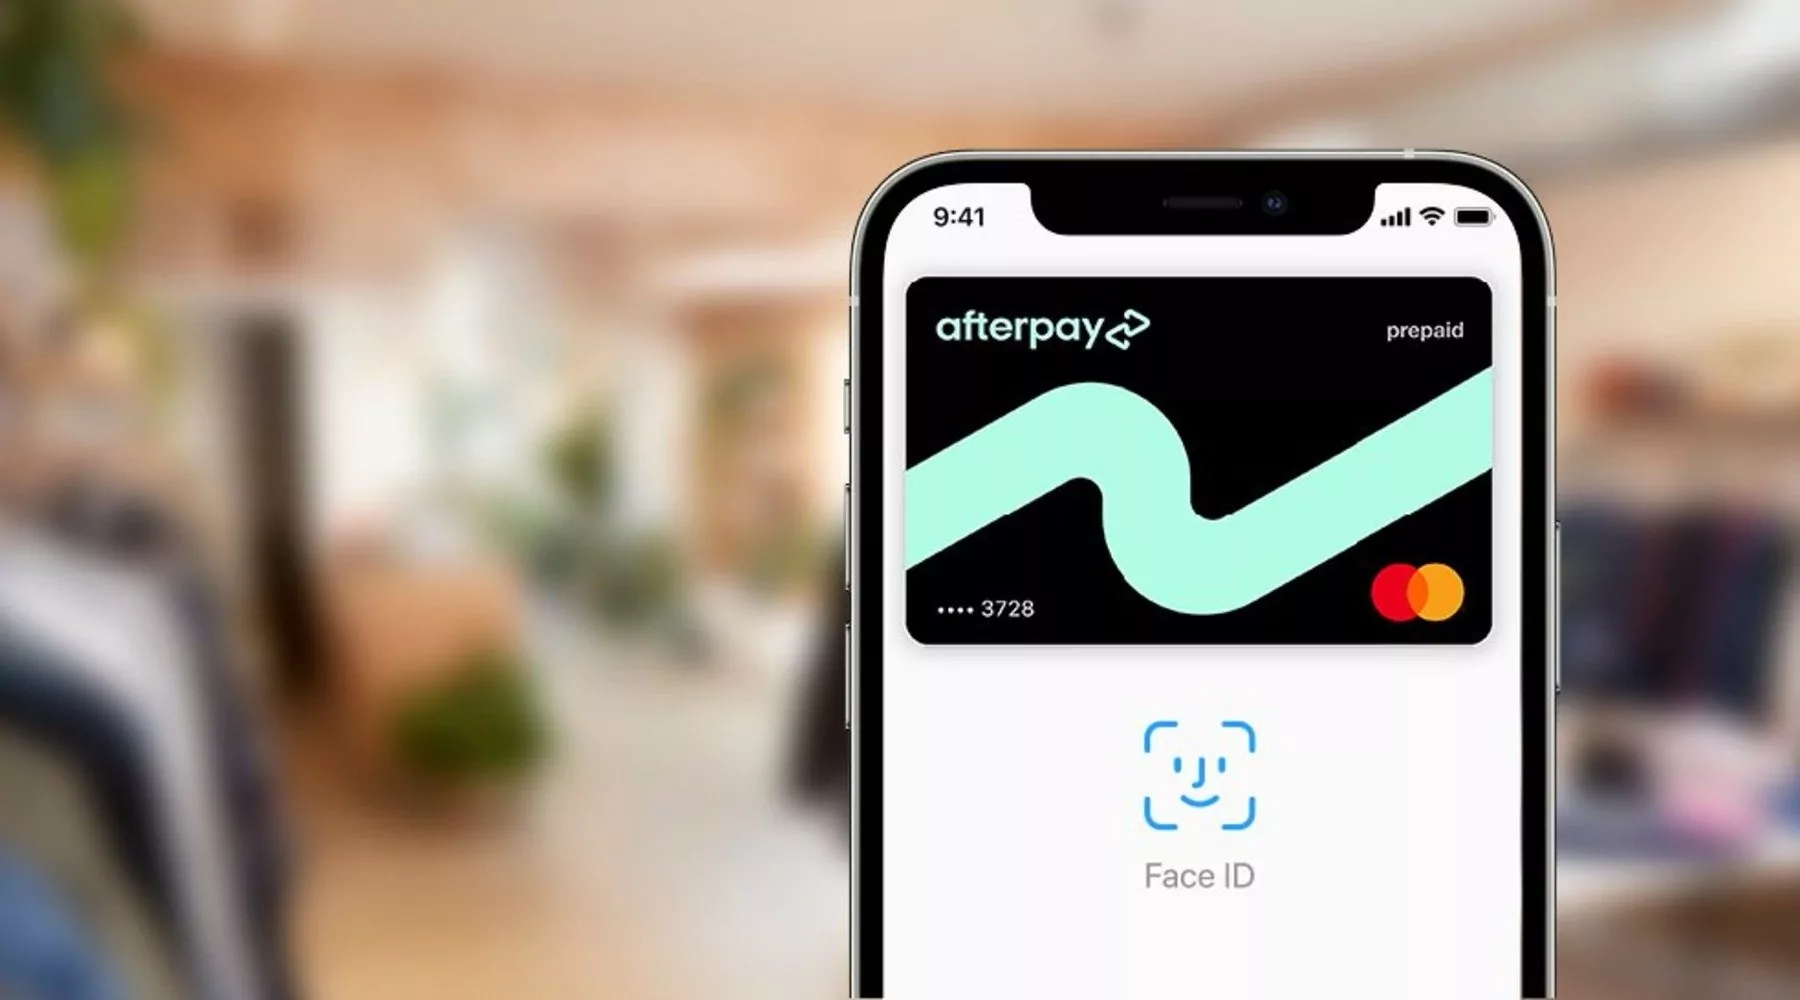 How To Use Afterpay Card Online